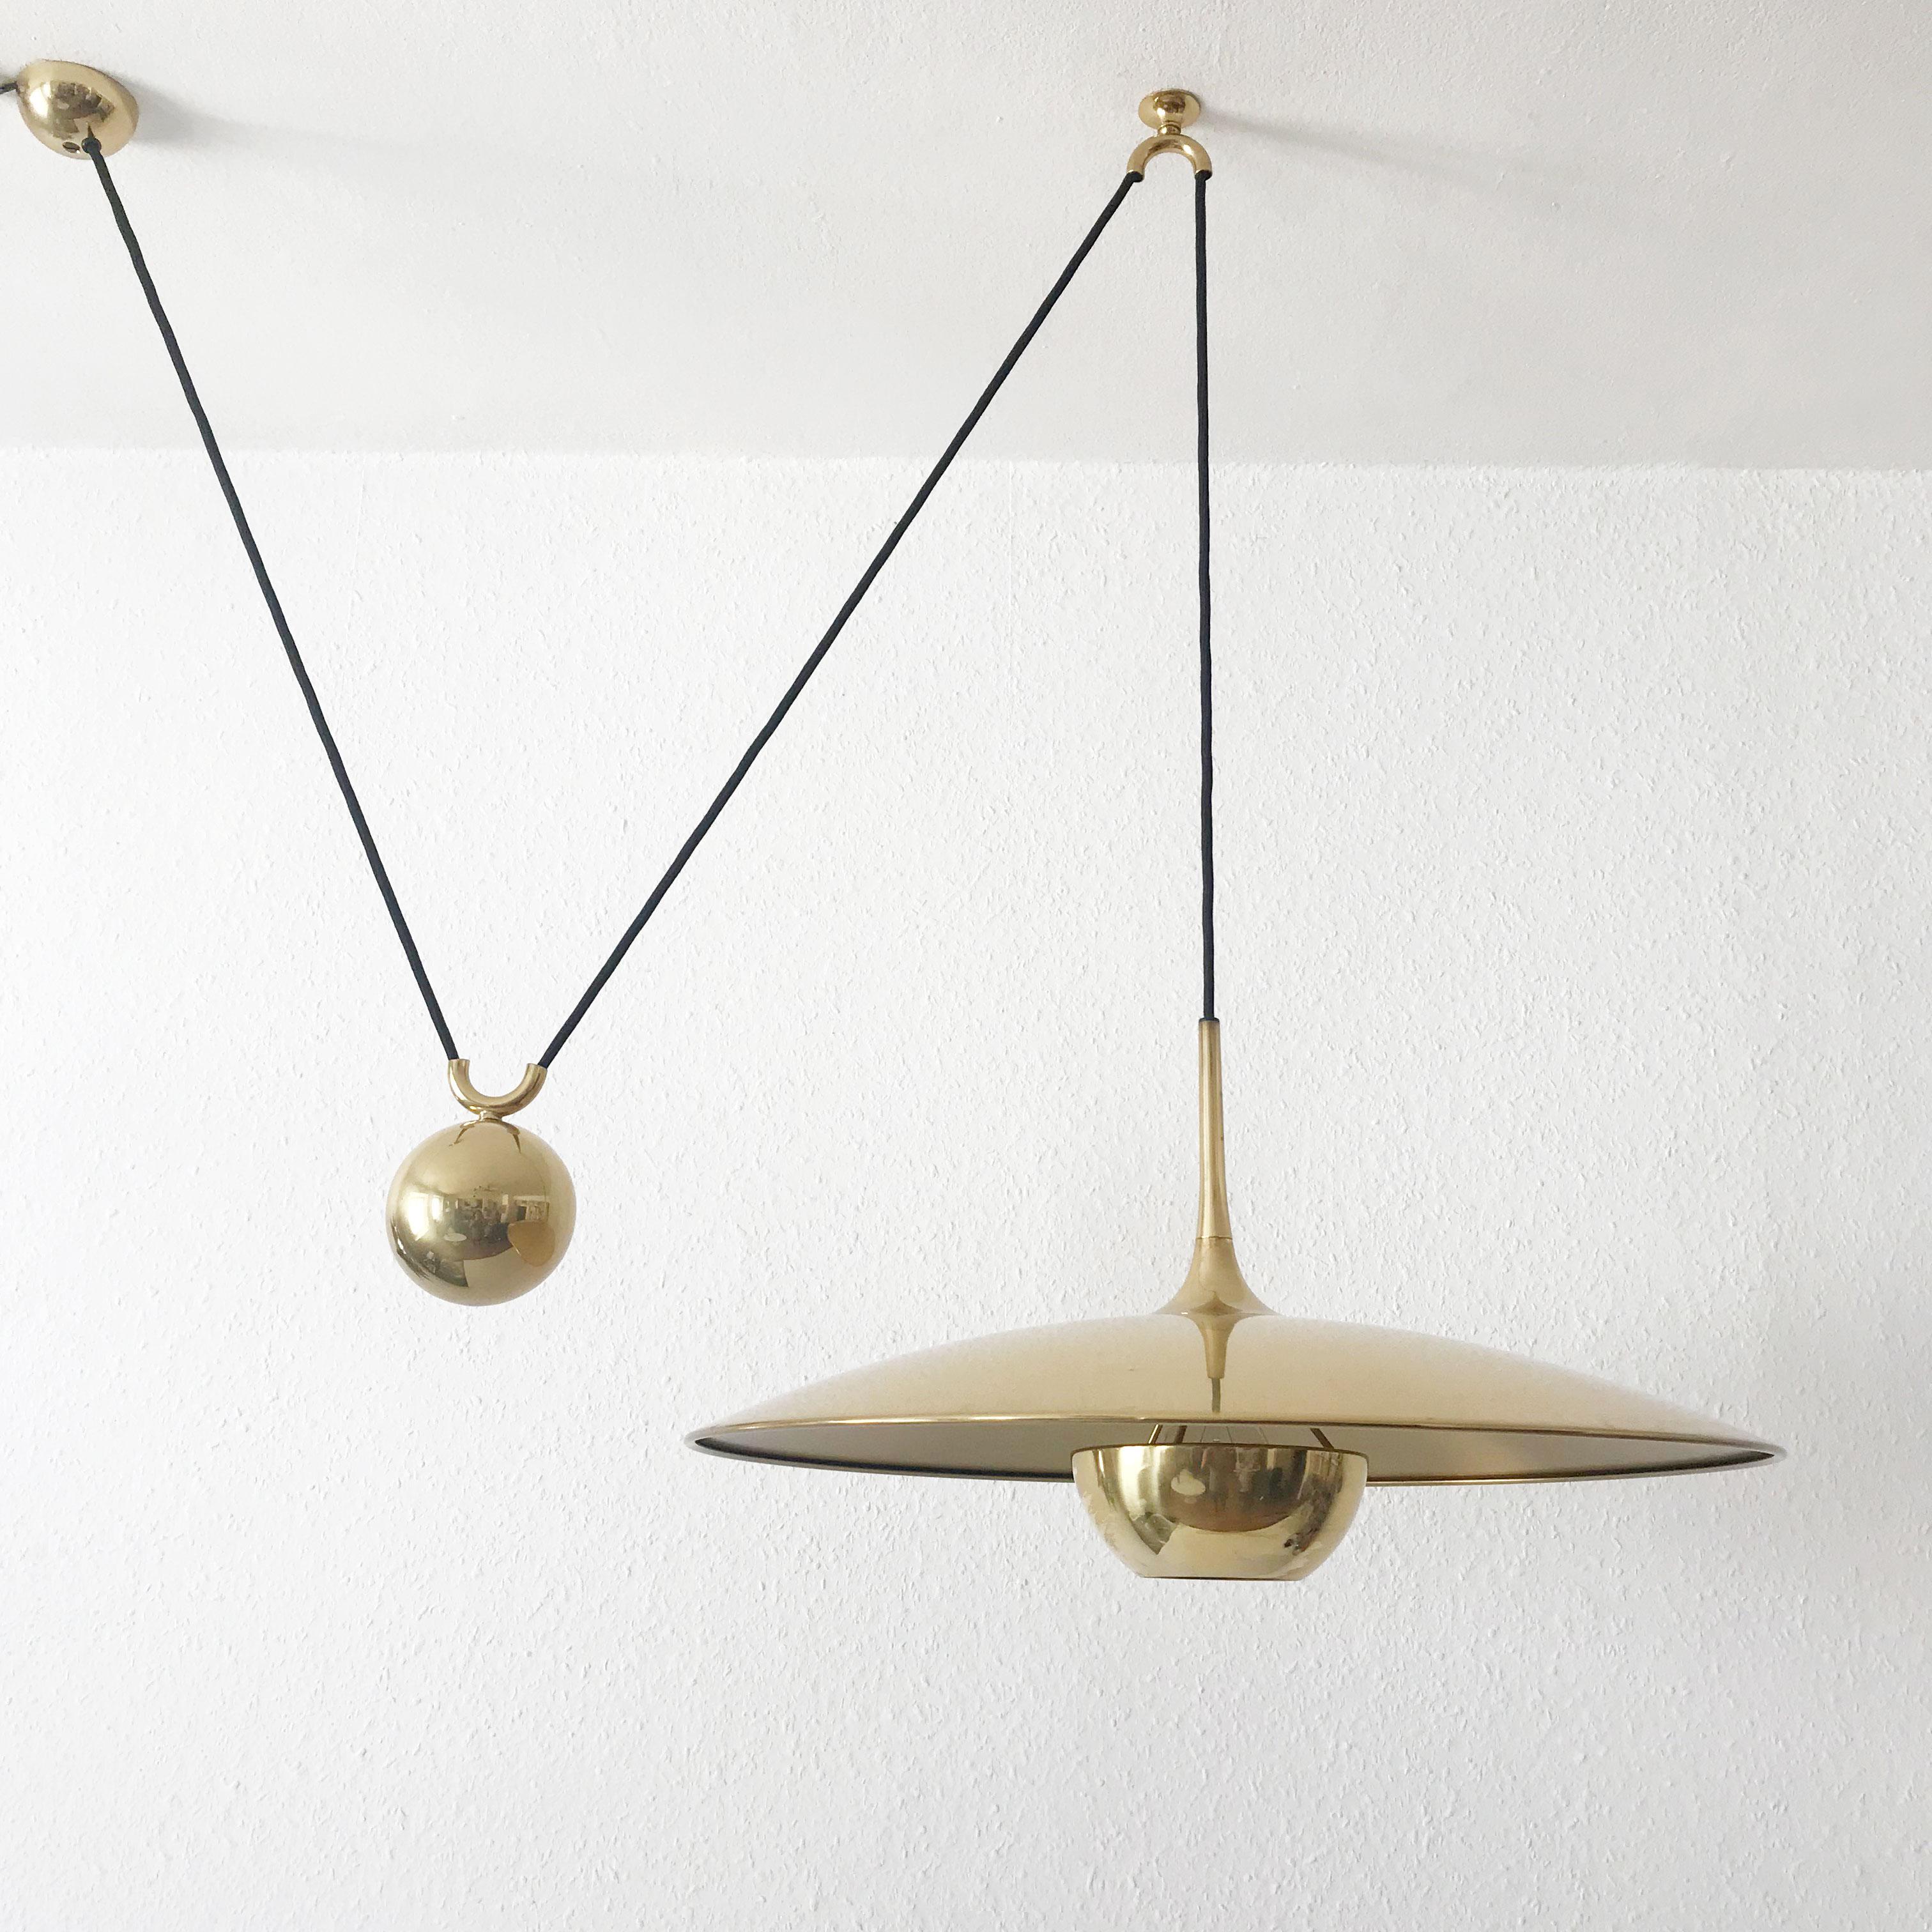 Counter Balance Pendant Lamp Onos 55 by Florian Schulz, 1980s, Germany 1